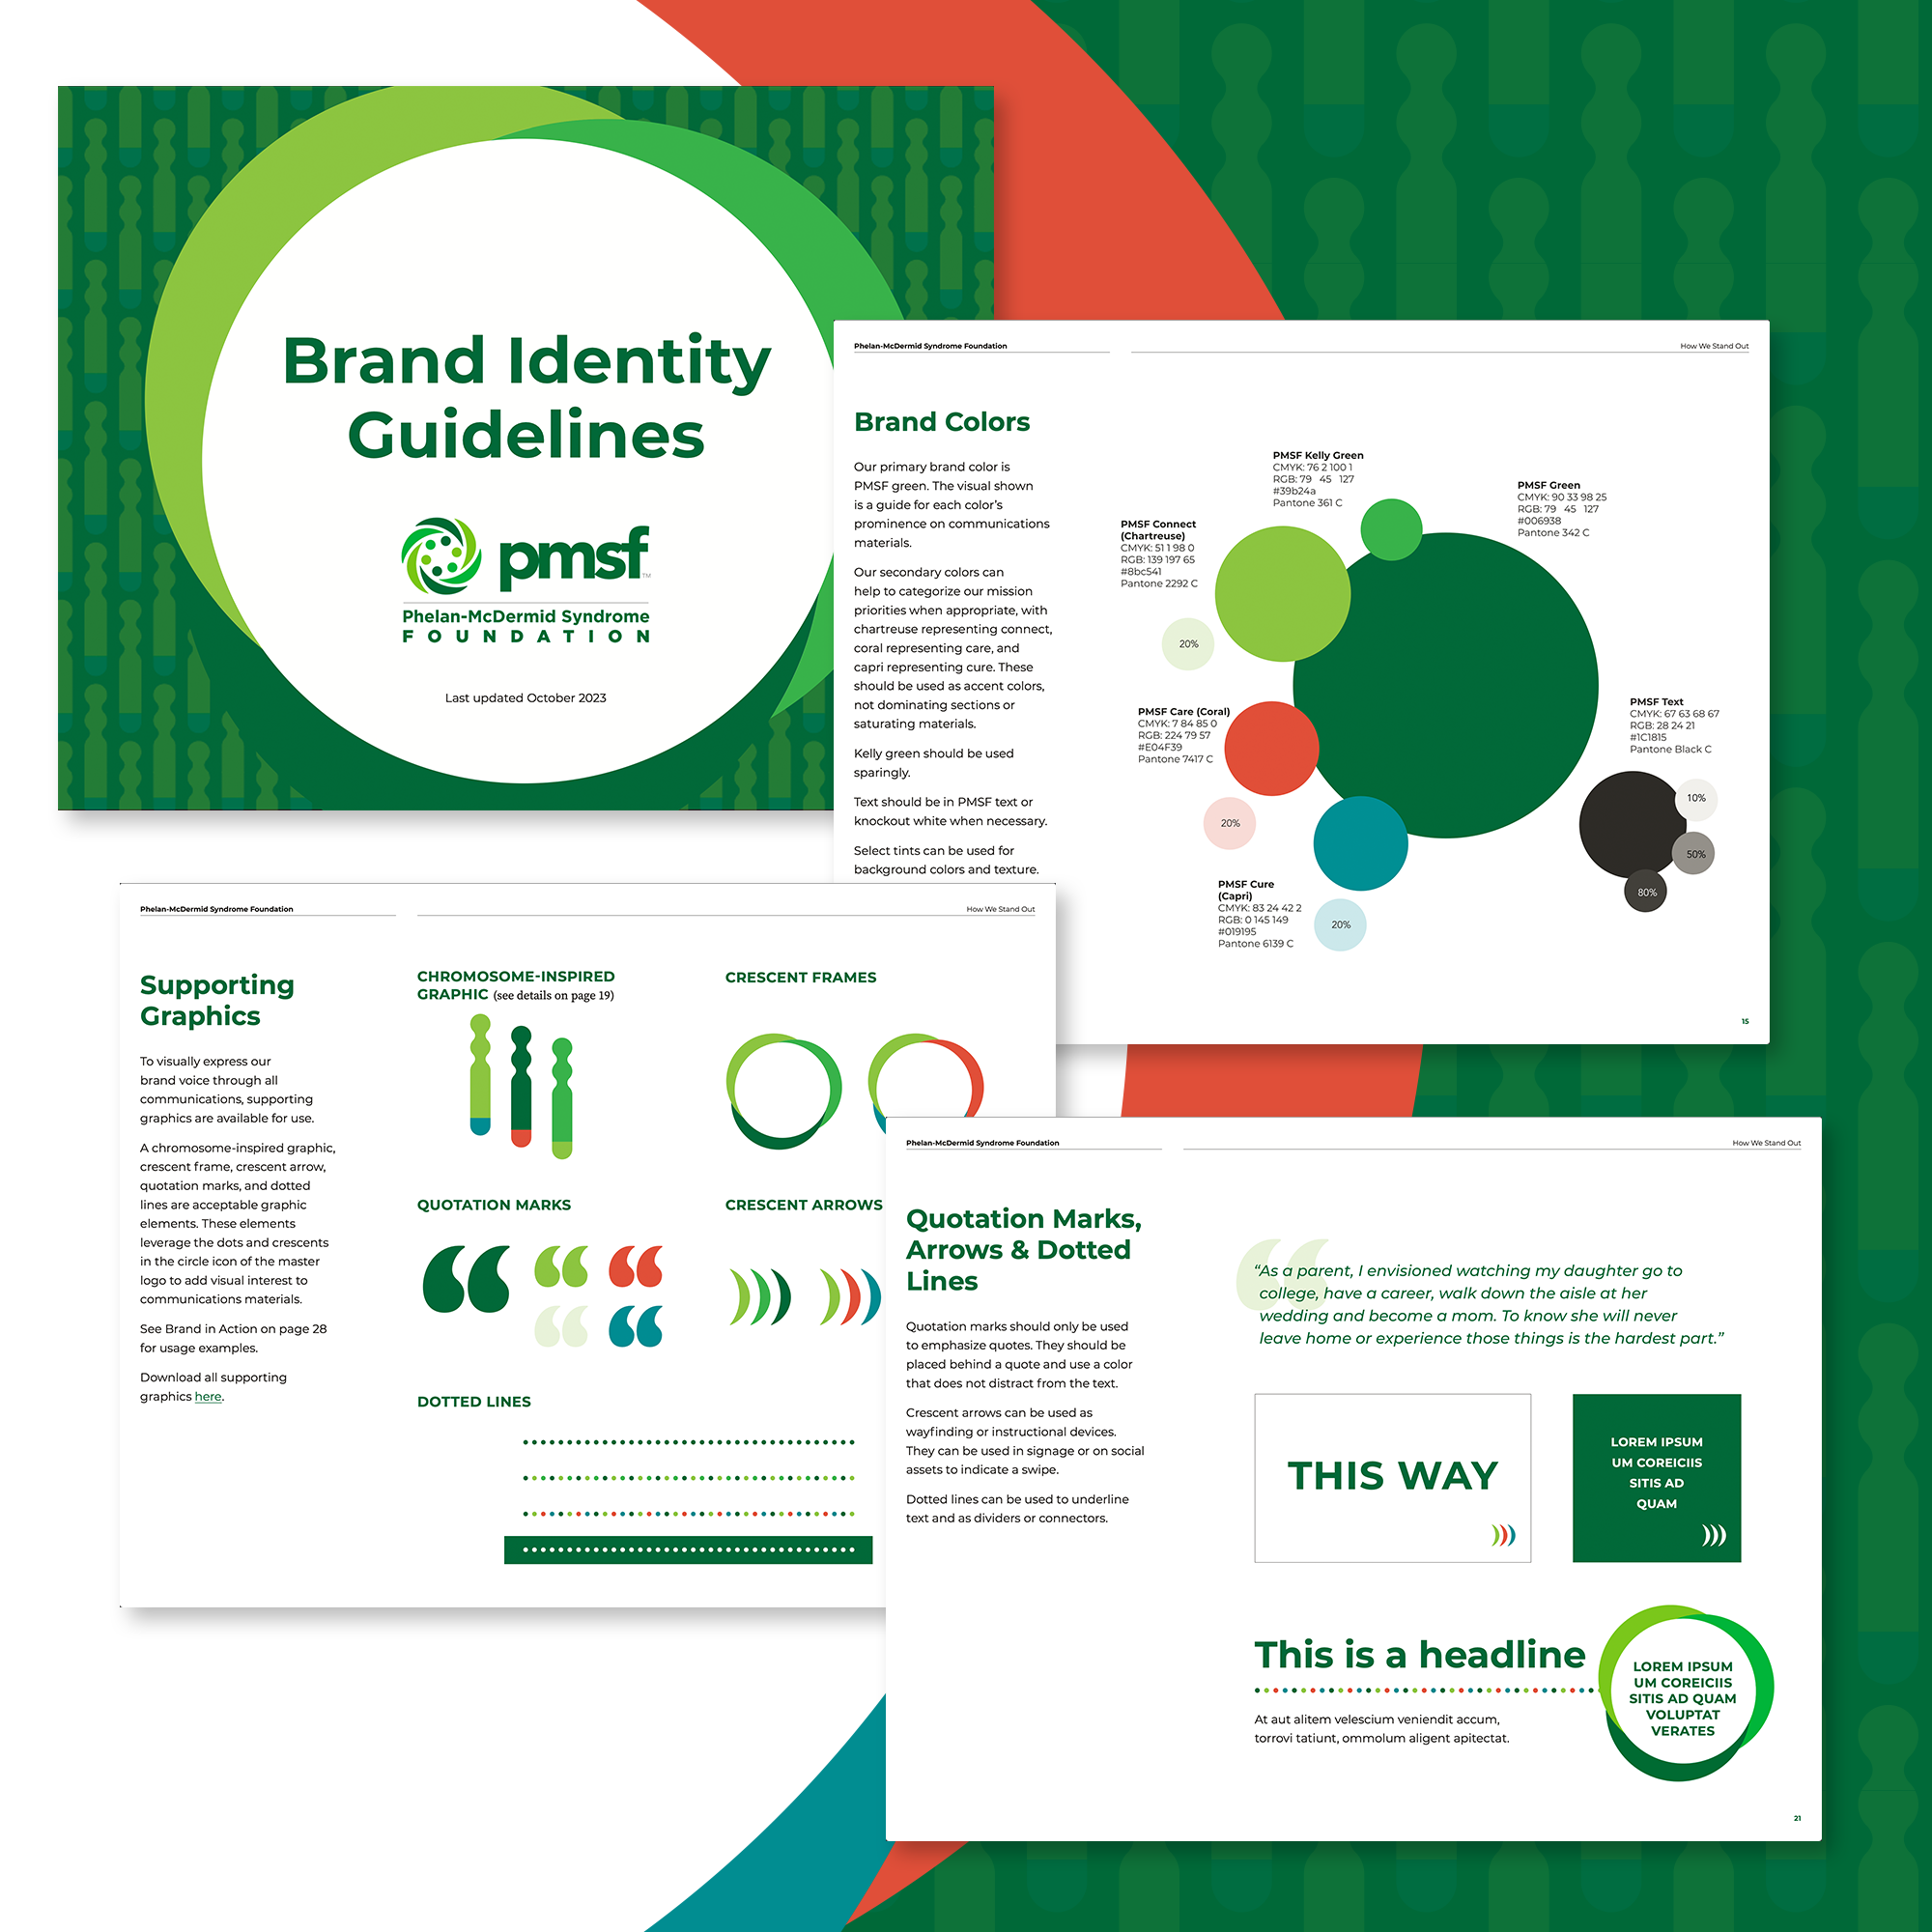 Phelan-McDermid Syndrome Foundation Brand Guidelines